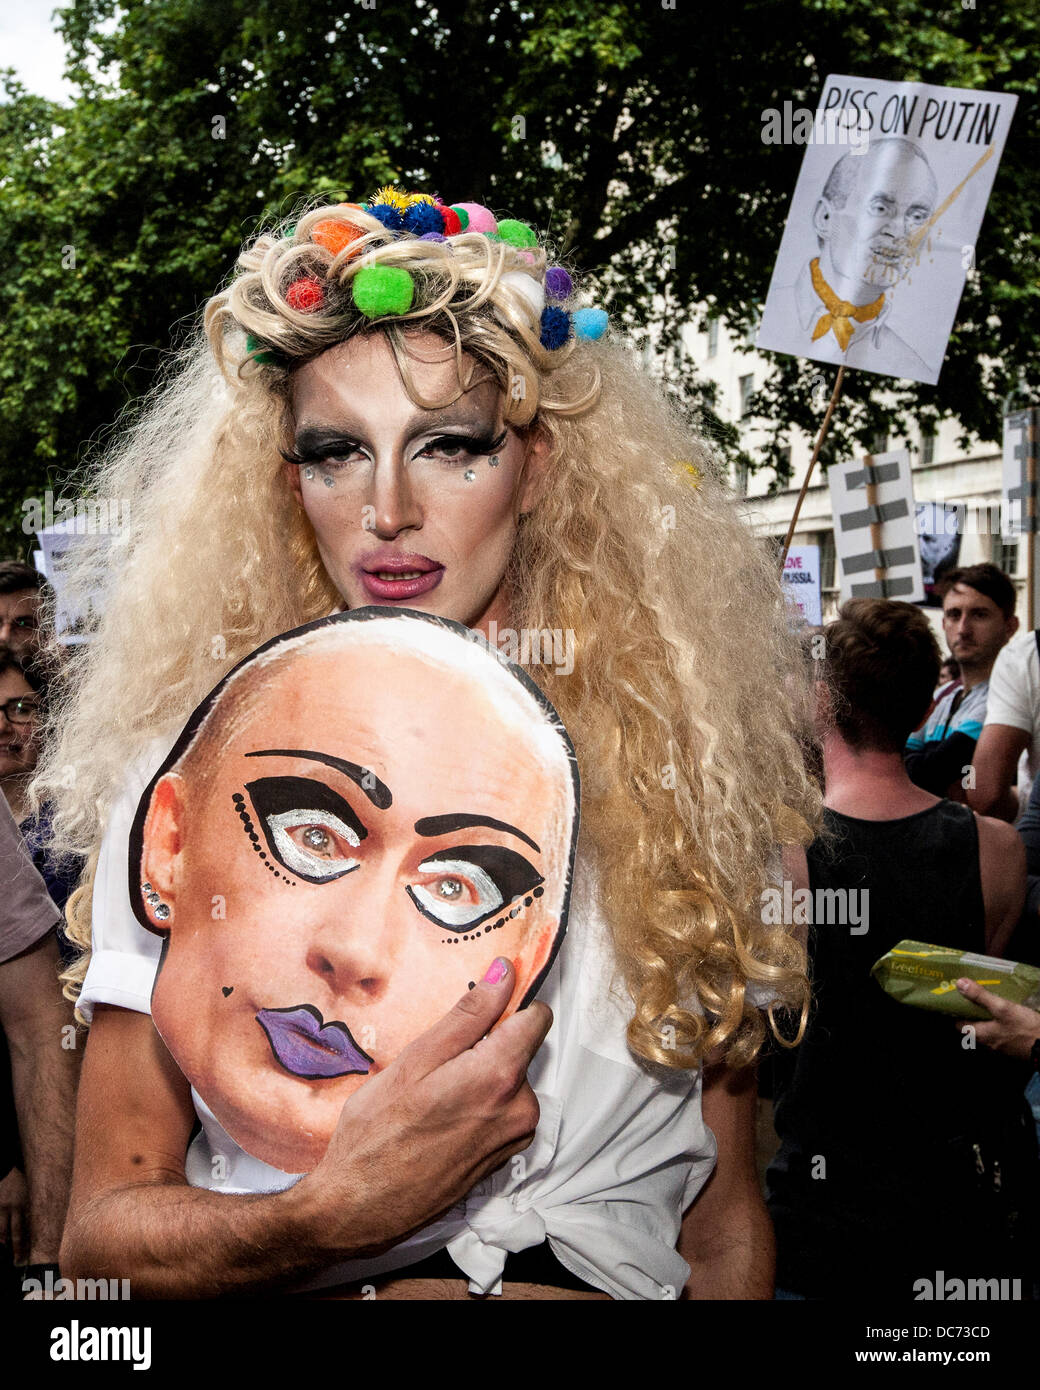 London, UK. 10th August 2013. Over 3000 gay protesters gathered for a demonstration against the treatment of homosexuals in Russia. They are calling for a boycott of the coming SOCHI 2014 Winter Olympics. London, United Kingdom  Credit:  Mario Mitsis / Alamy Live News Stock Photo